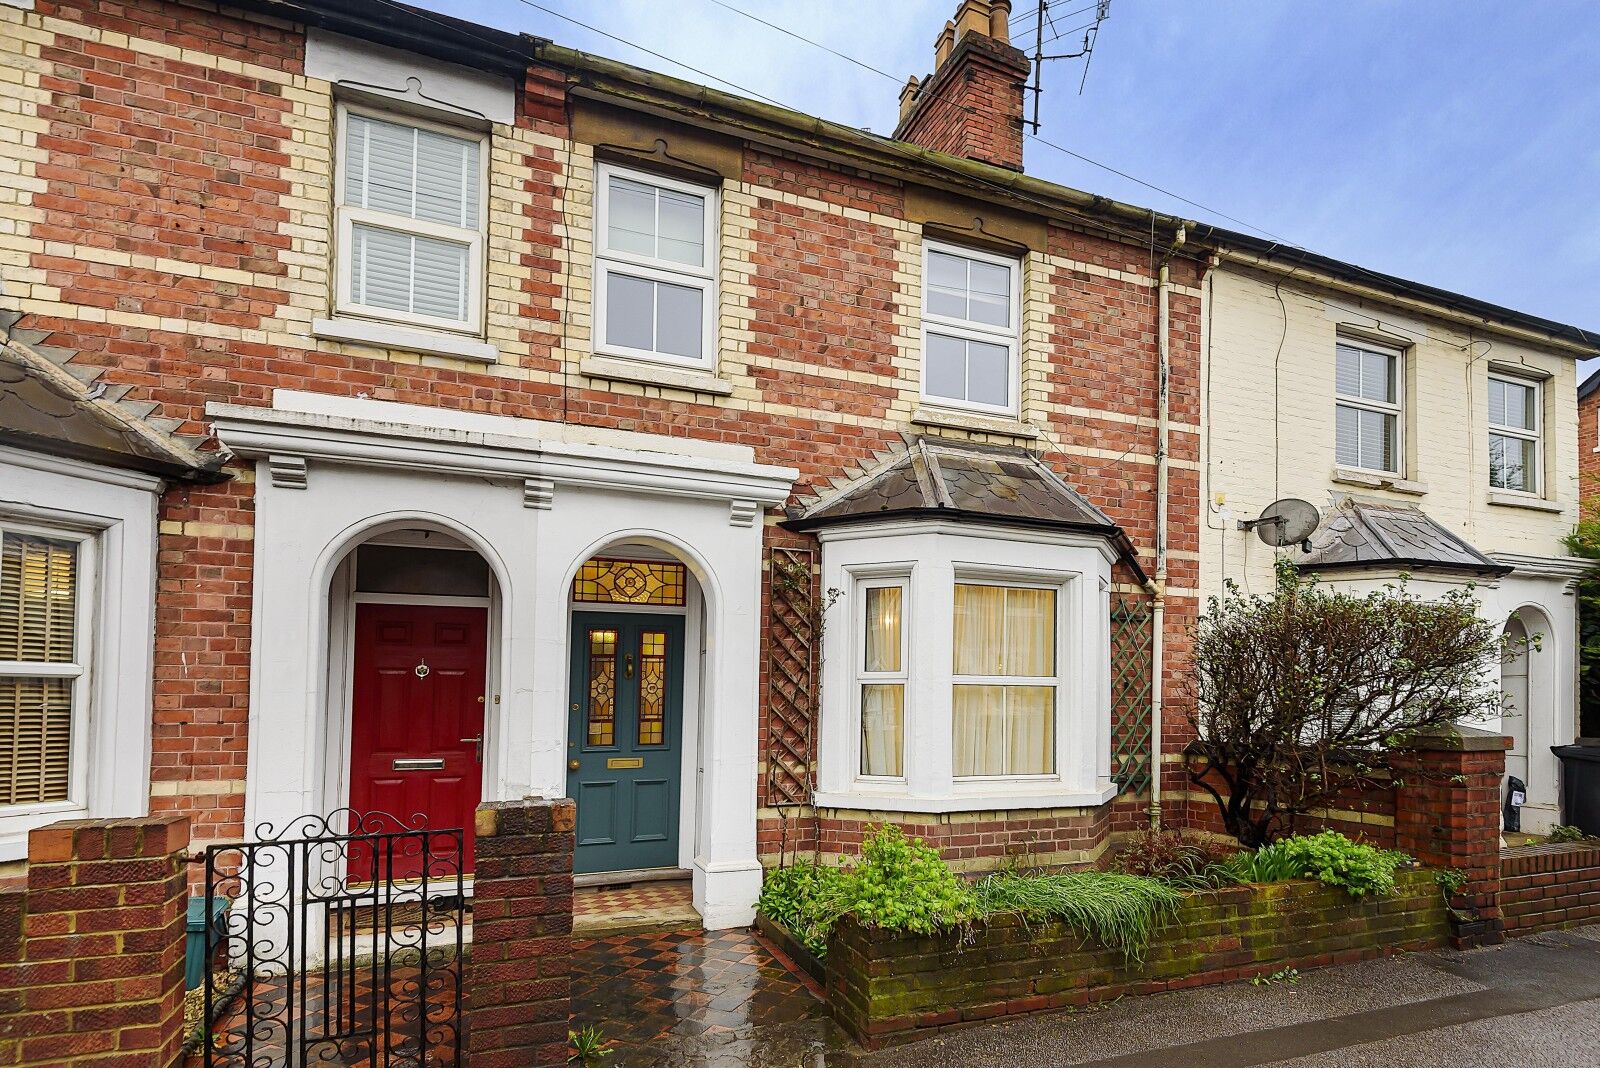 3 bedroom mid terraced house for sale Reading Road, Henley-On-Thames, RG9, main image